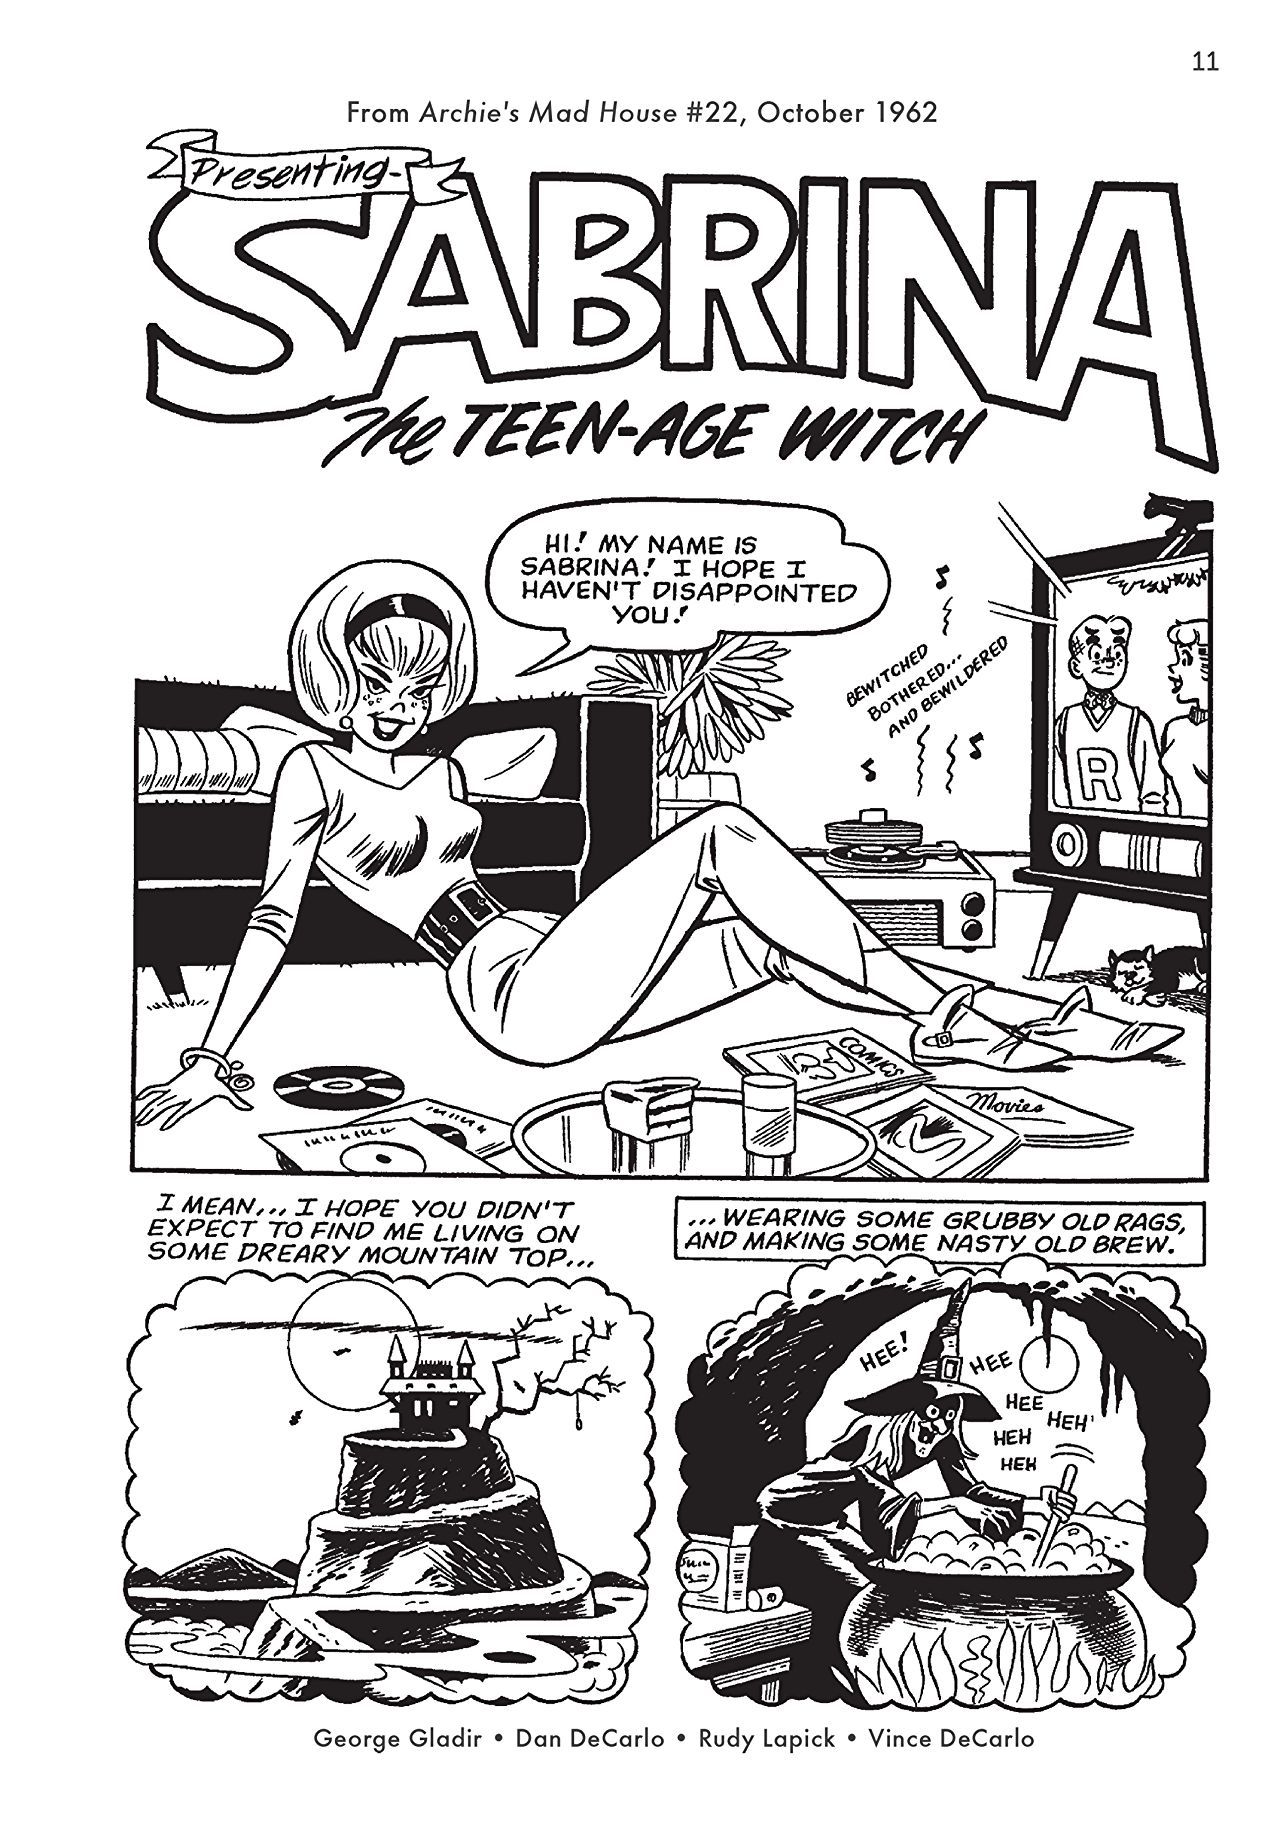 Sabrina The Teen-Age Witch 1962